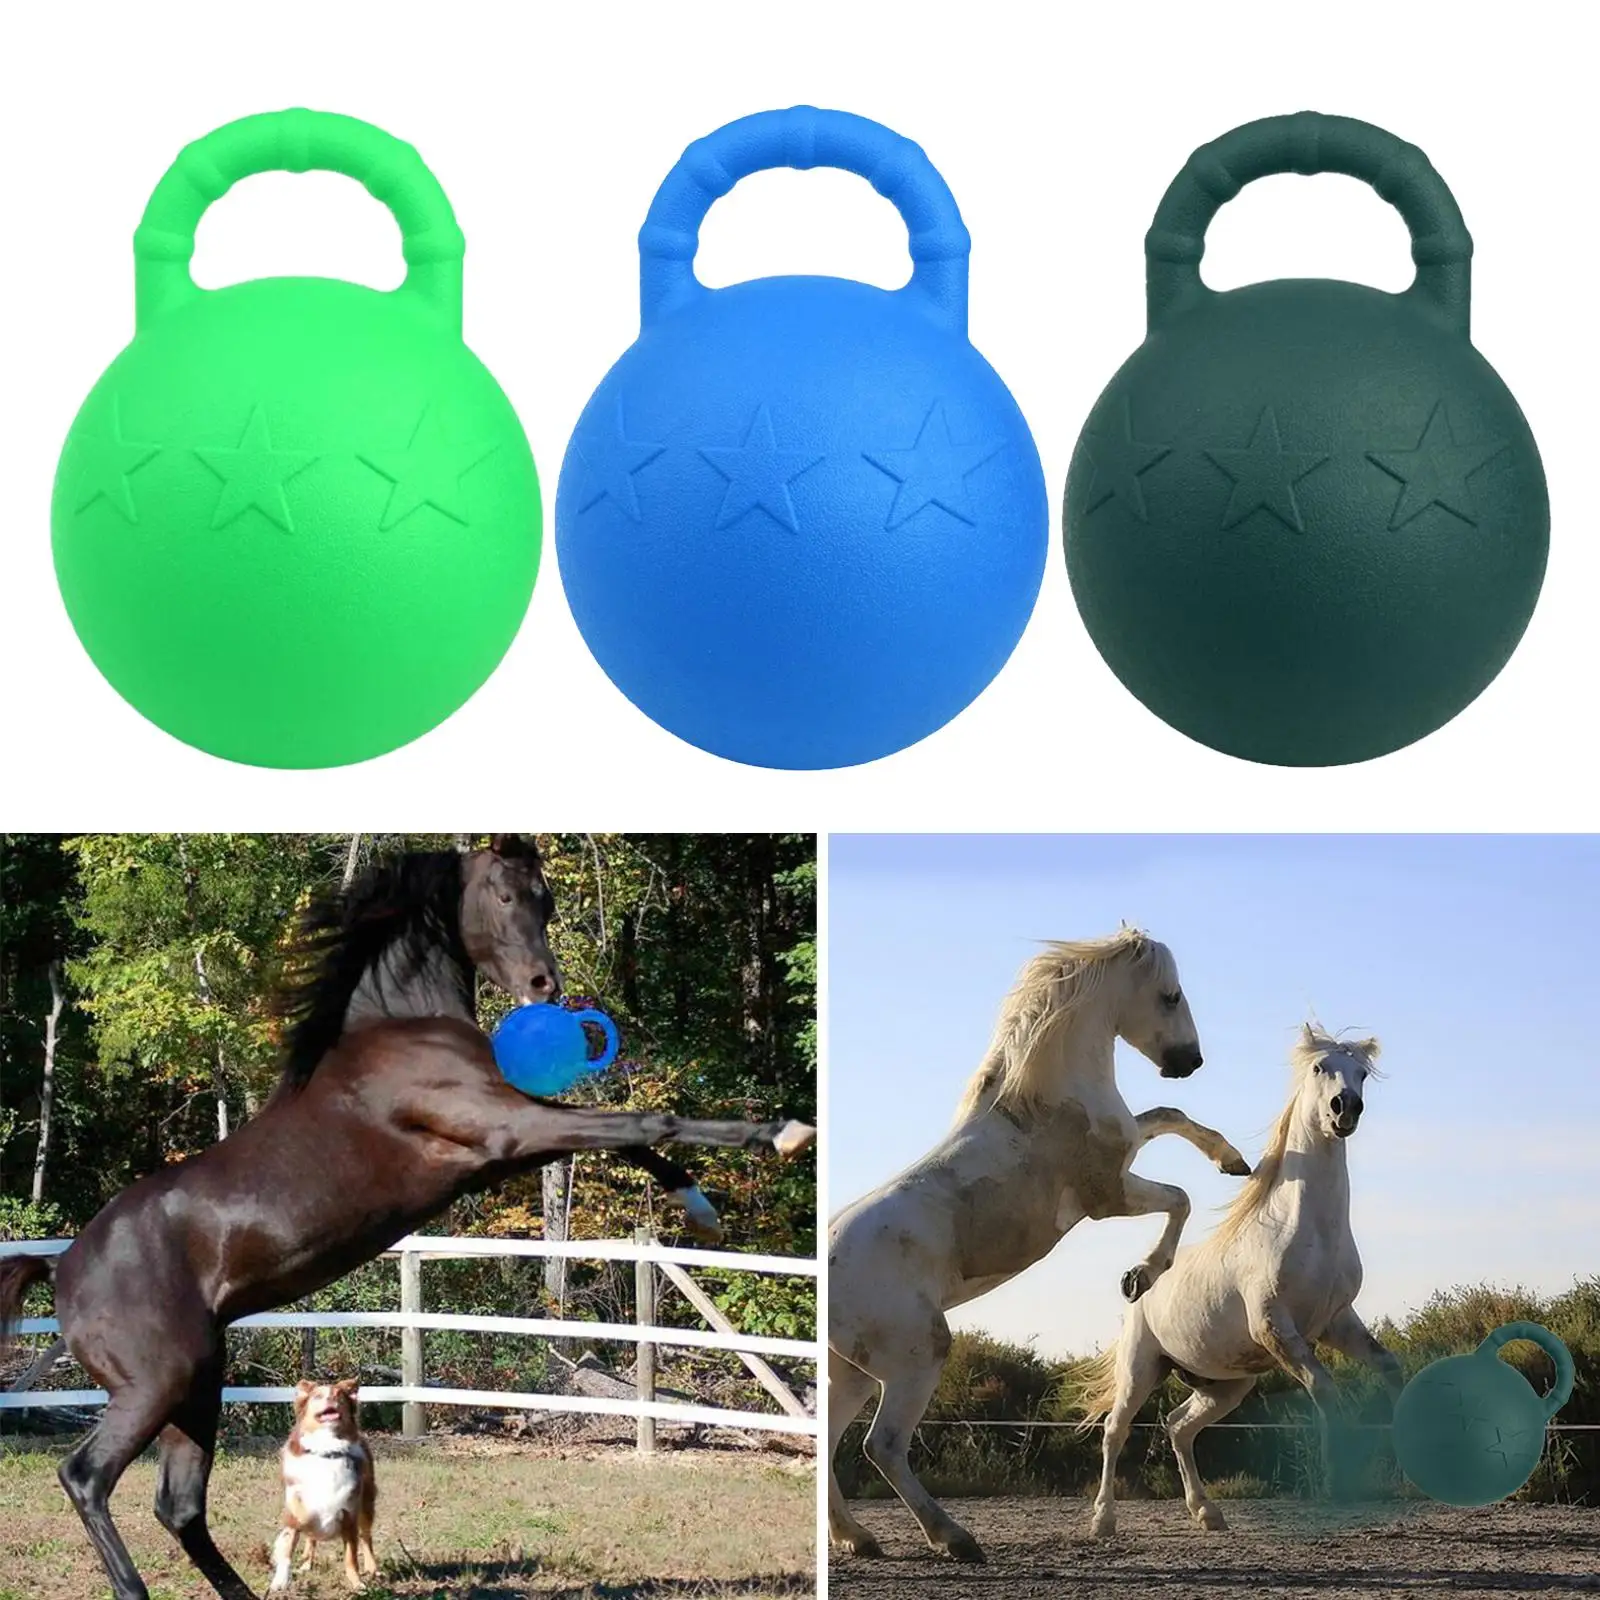 Medium Large Dogs Equine Horse Pony Playing Soccer Toy with Handle Random Color